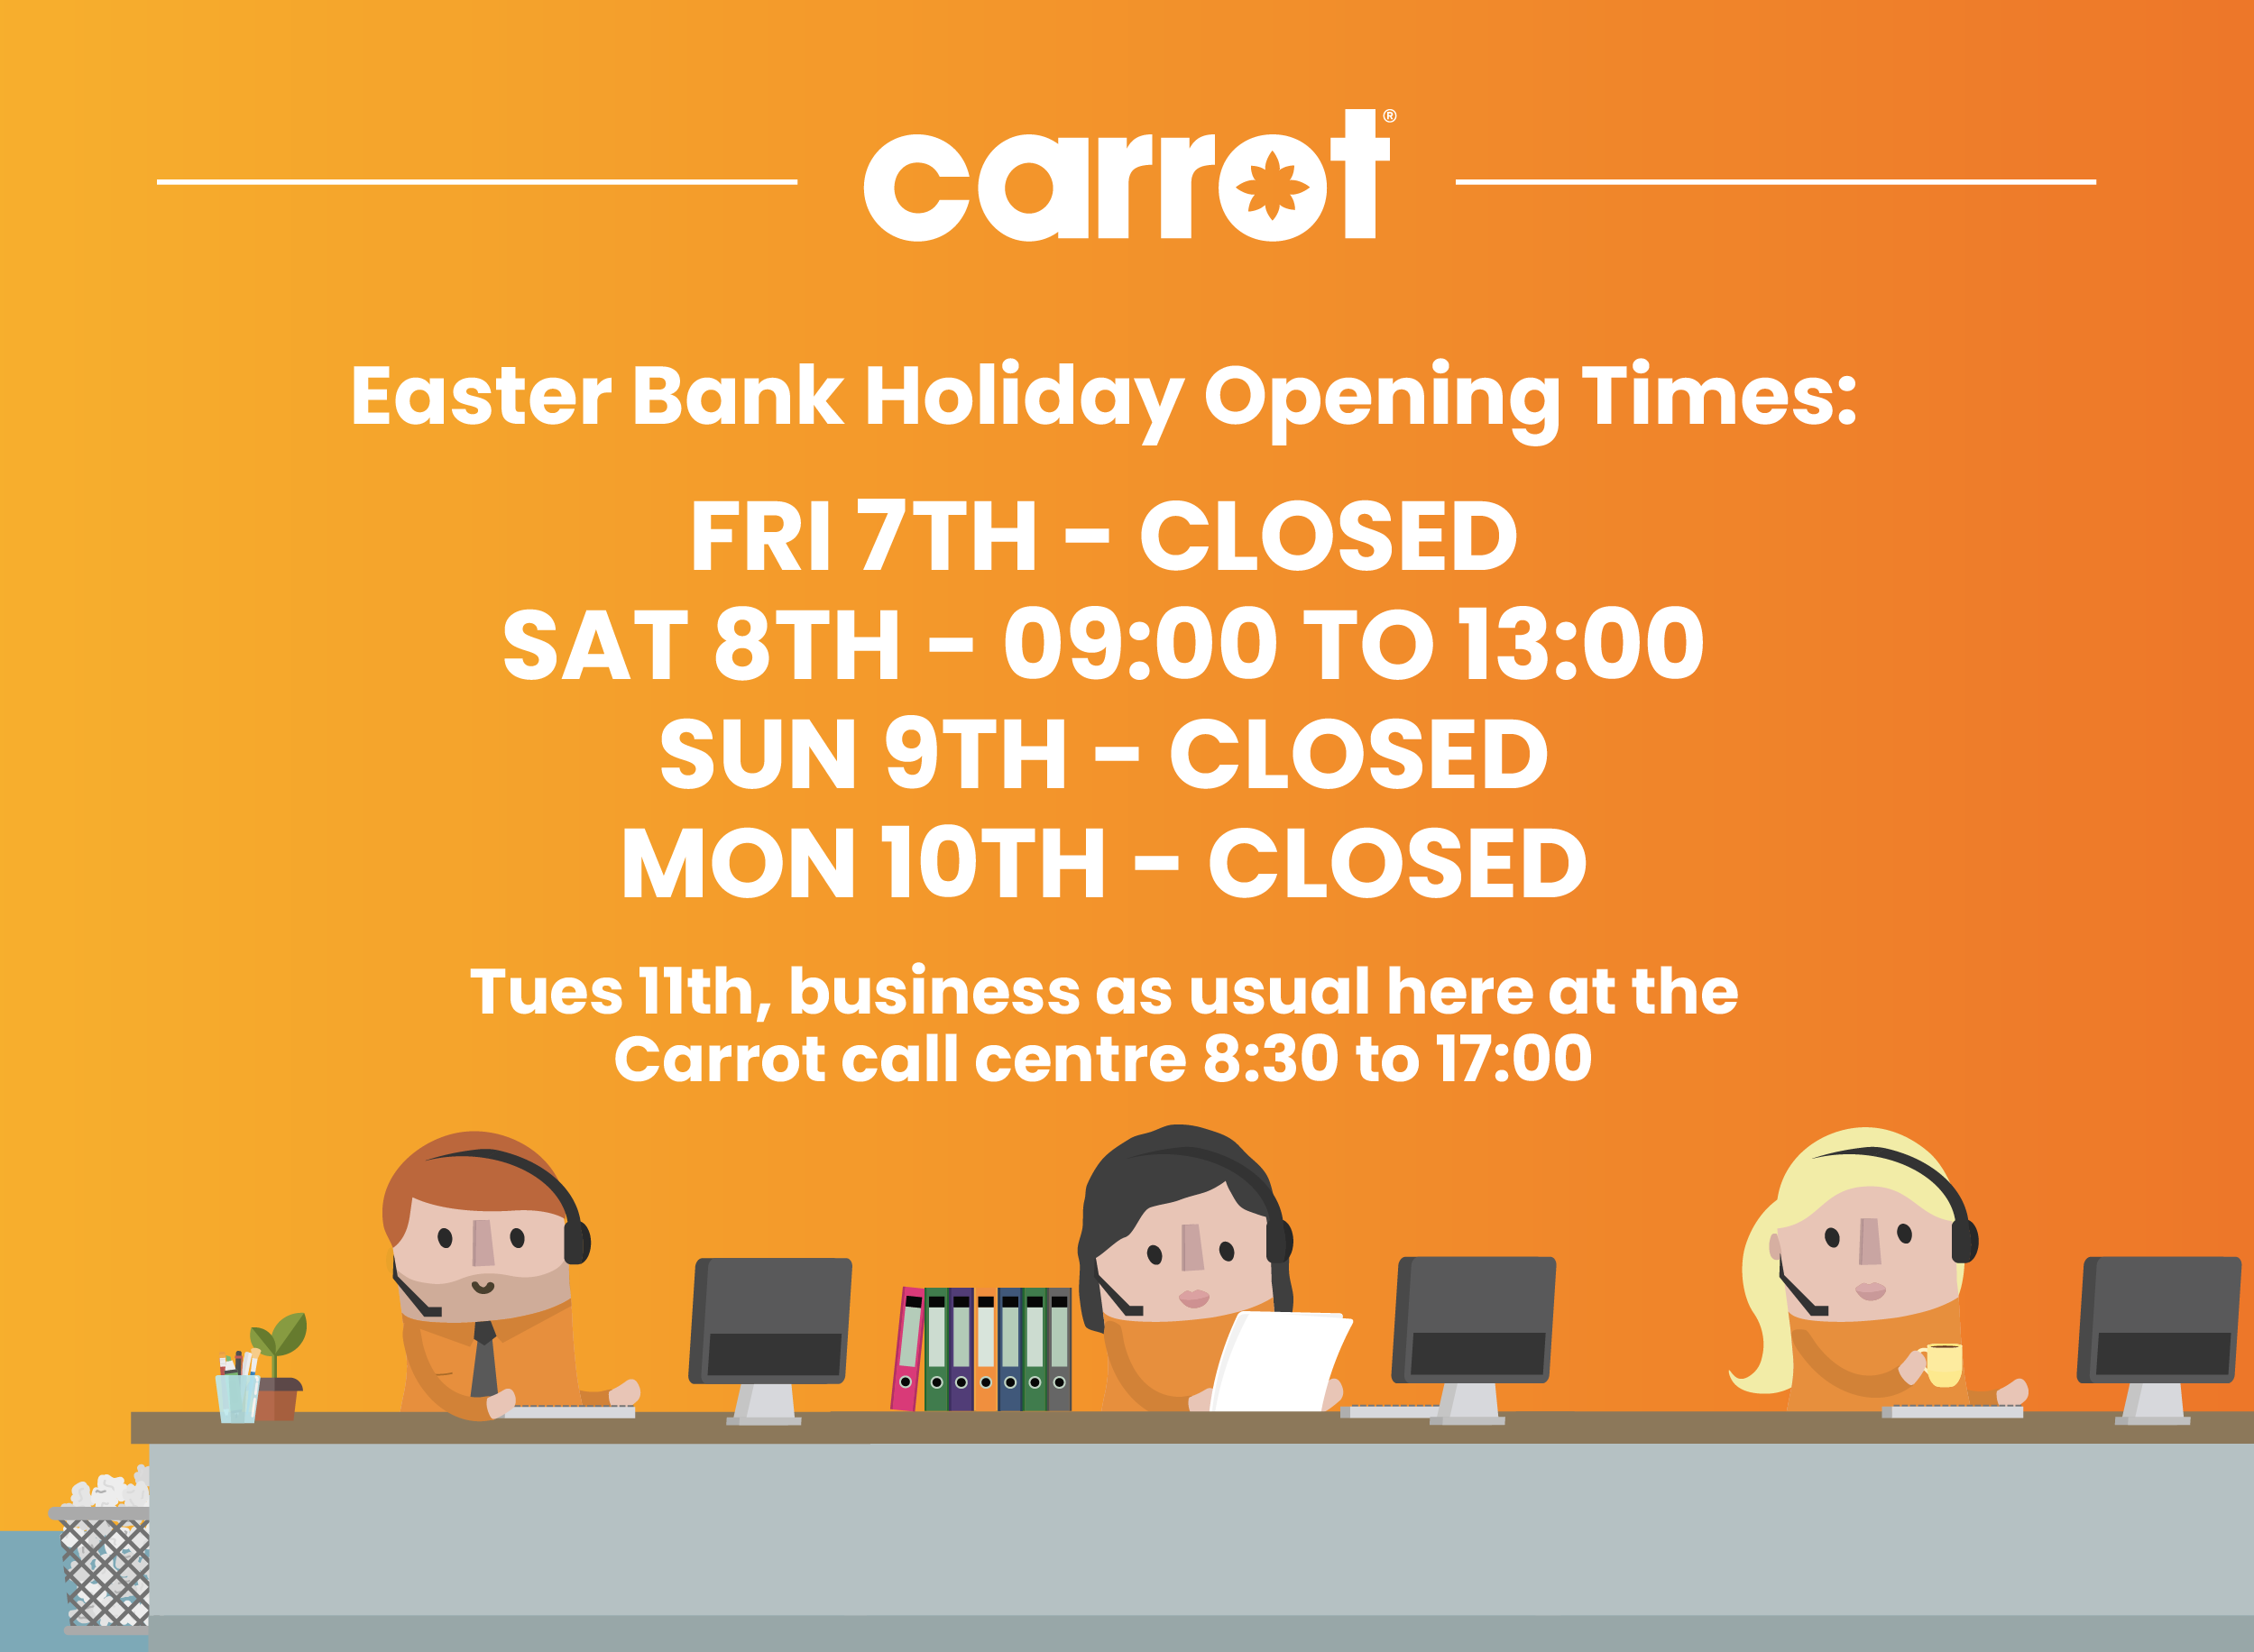 Easter opening hours: Closed Friday, Sunday and Monday. Open from 9am until 1pm on Easter Saturday.